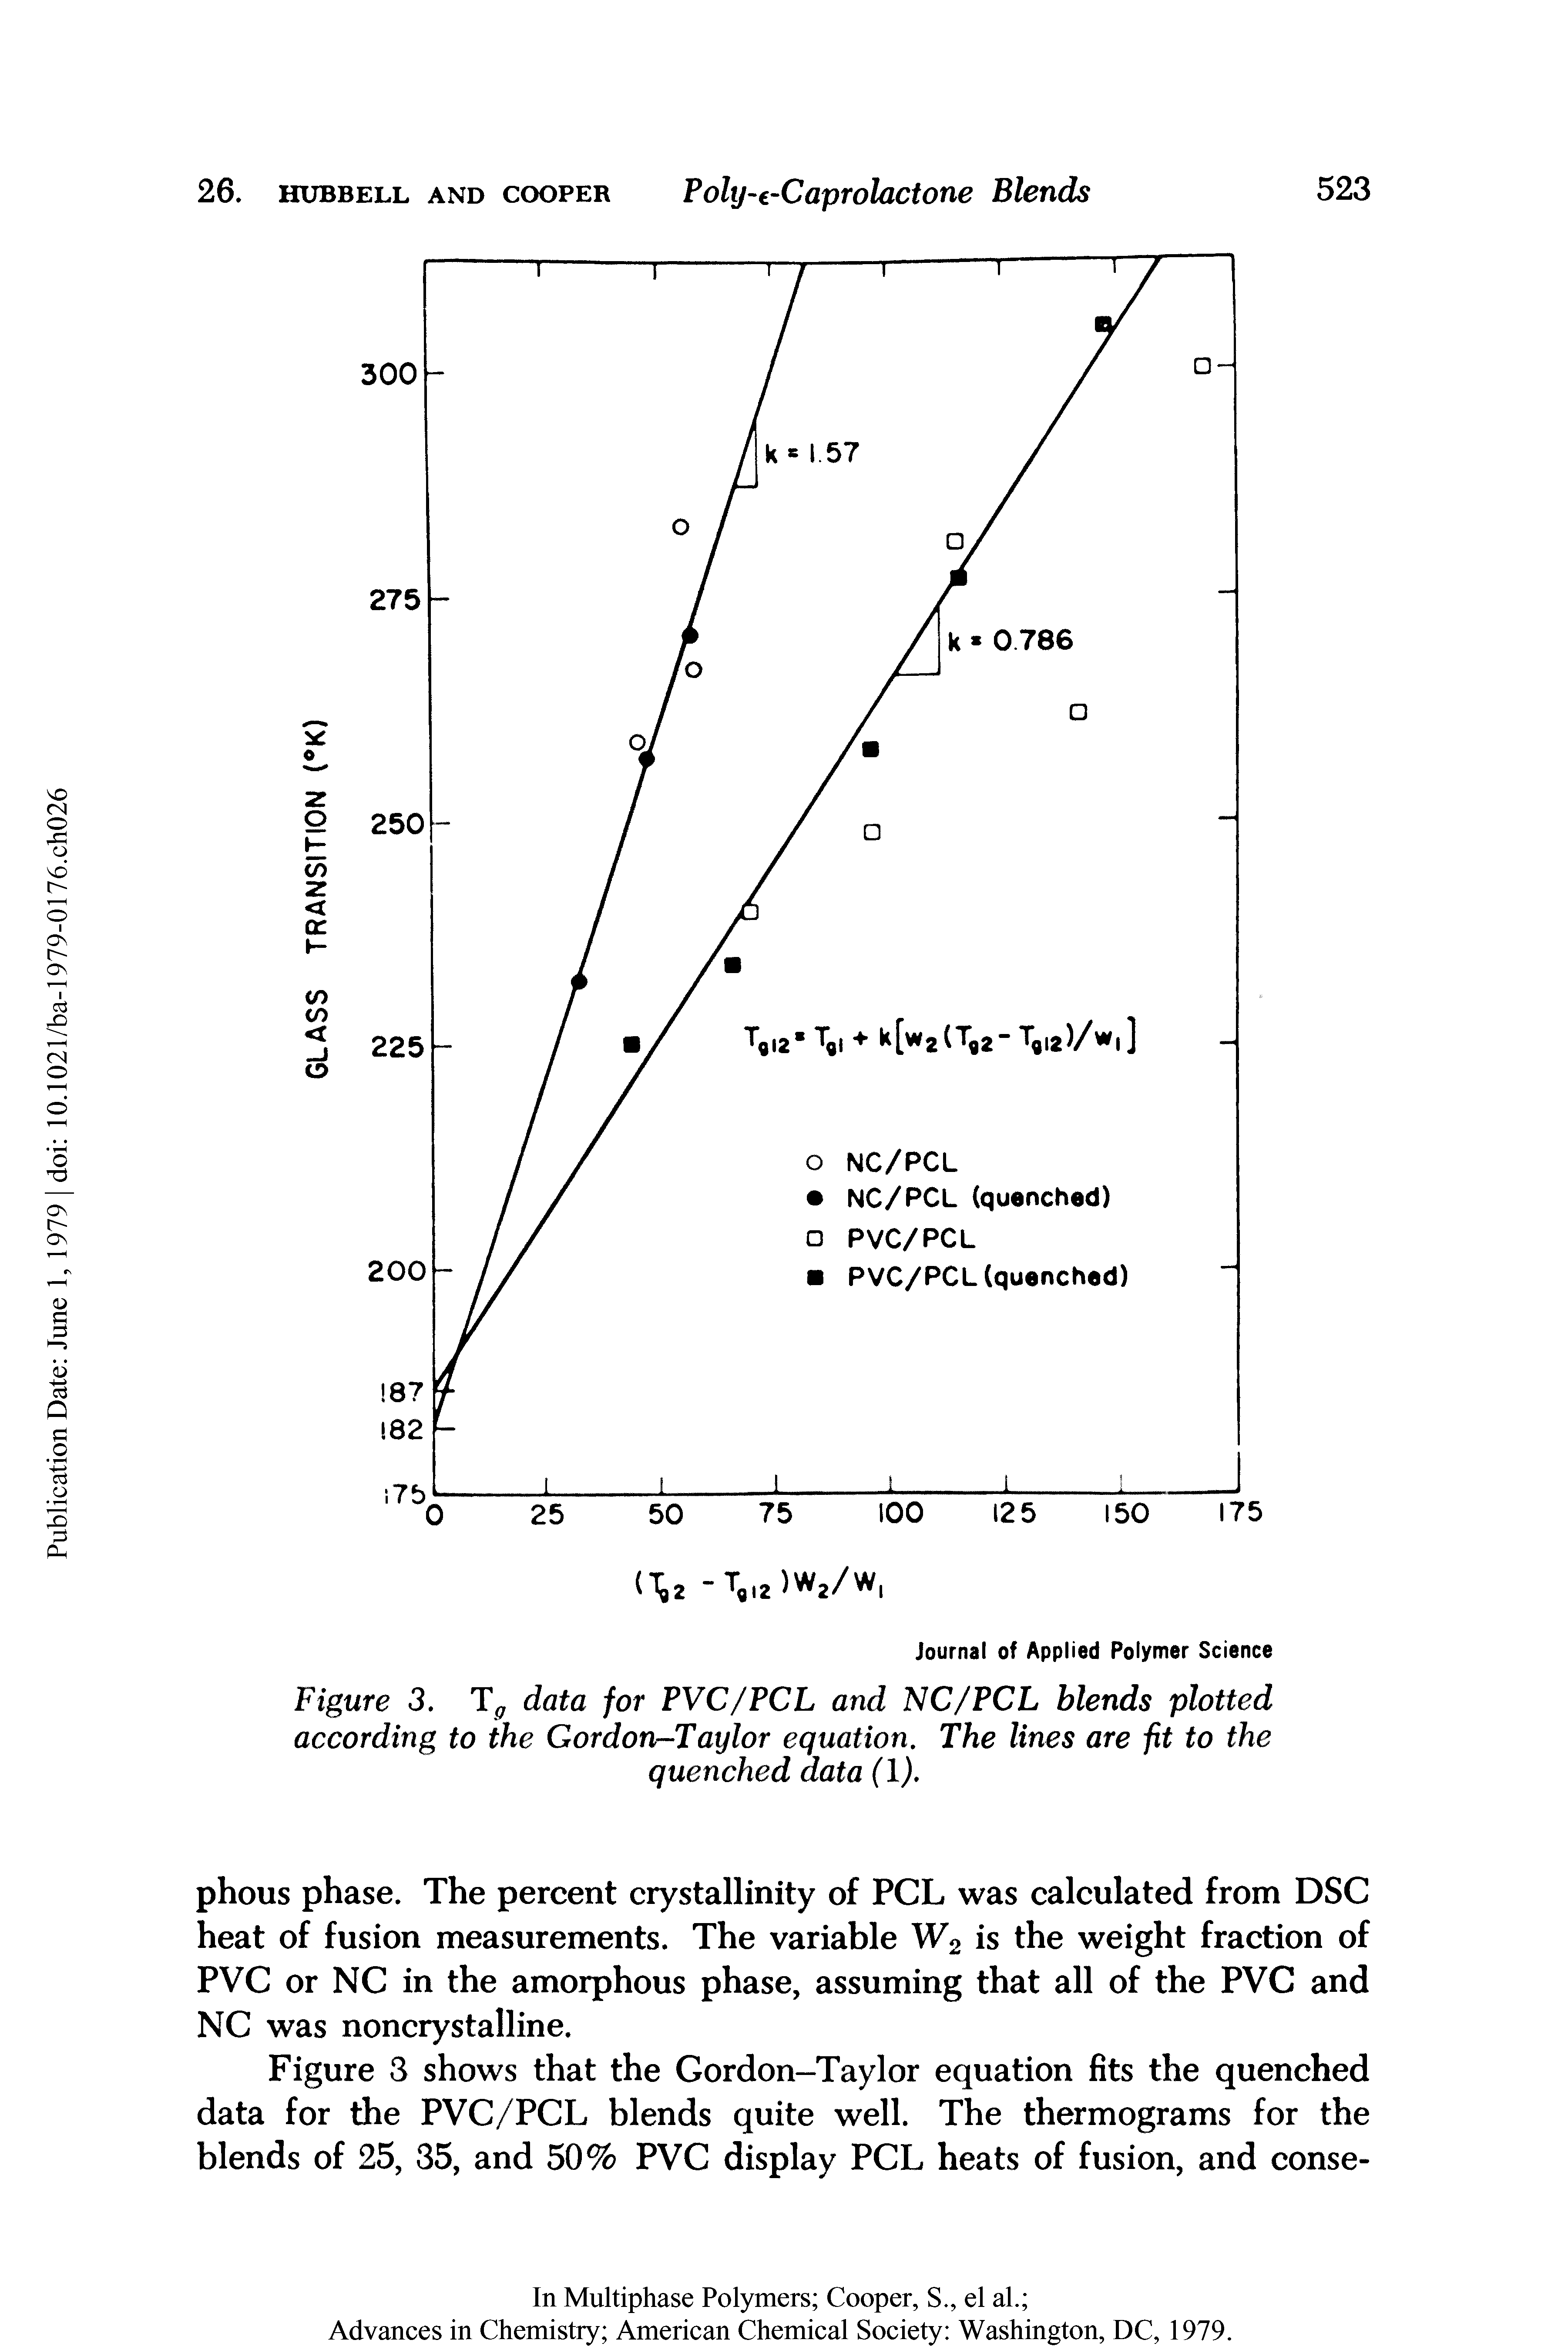 Figure 3. Tg data for PVC/PCL and NC/PCL blends plotted according to the Gordon-Taylor equation. The lines are fit to the quenched data (1).